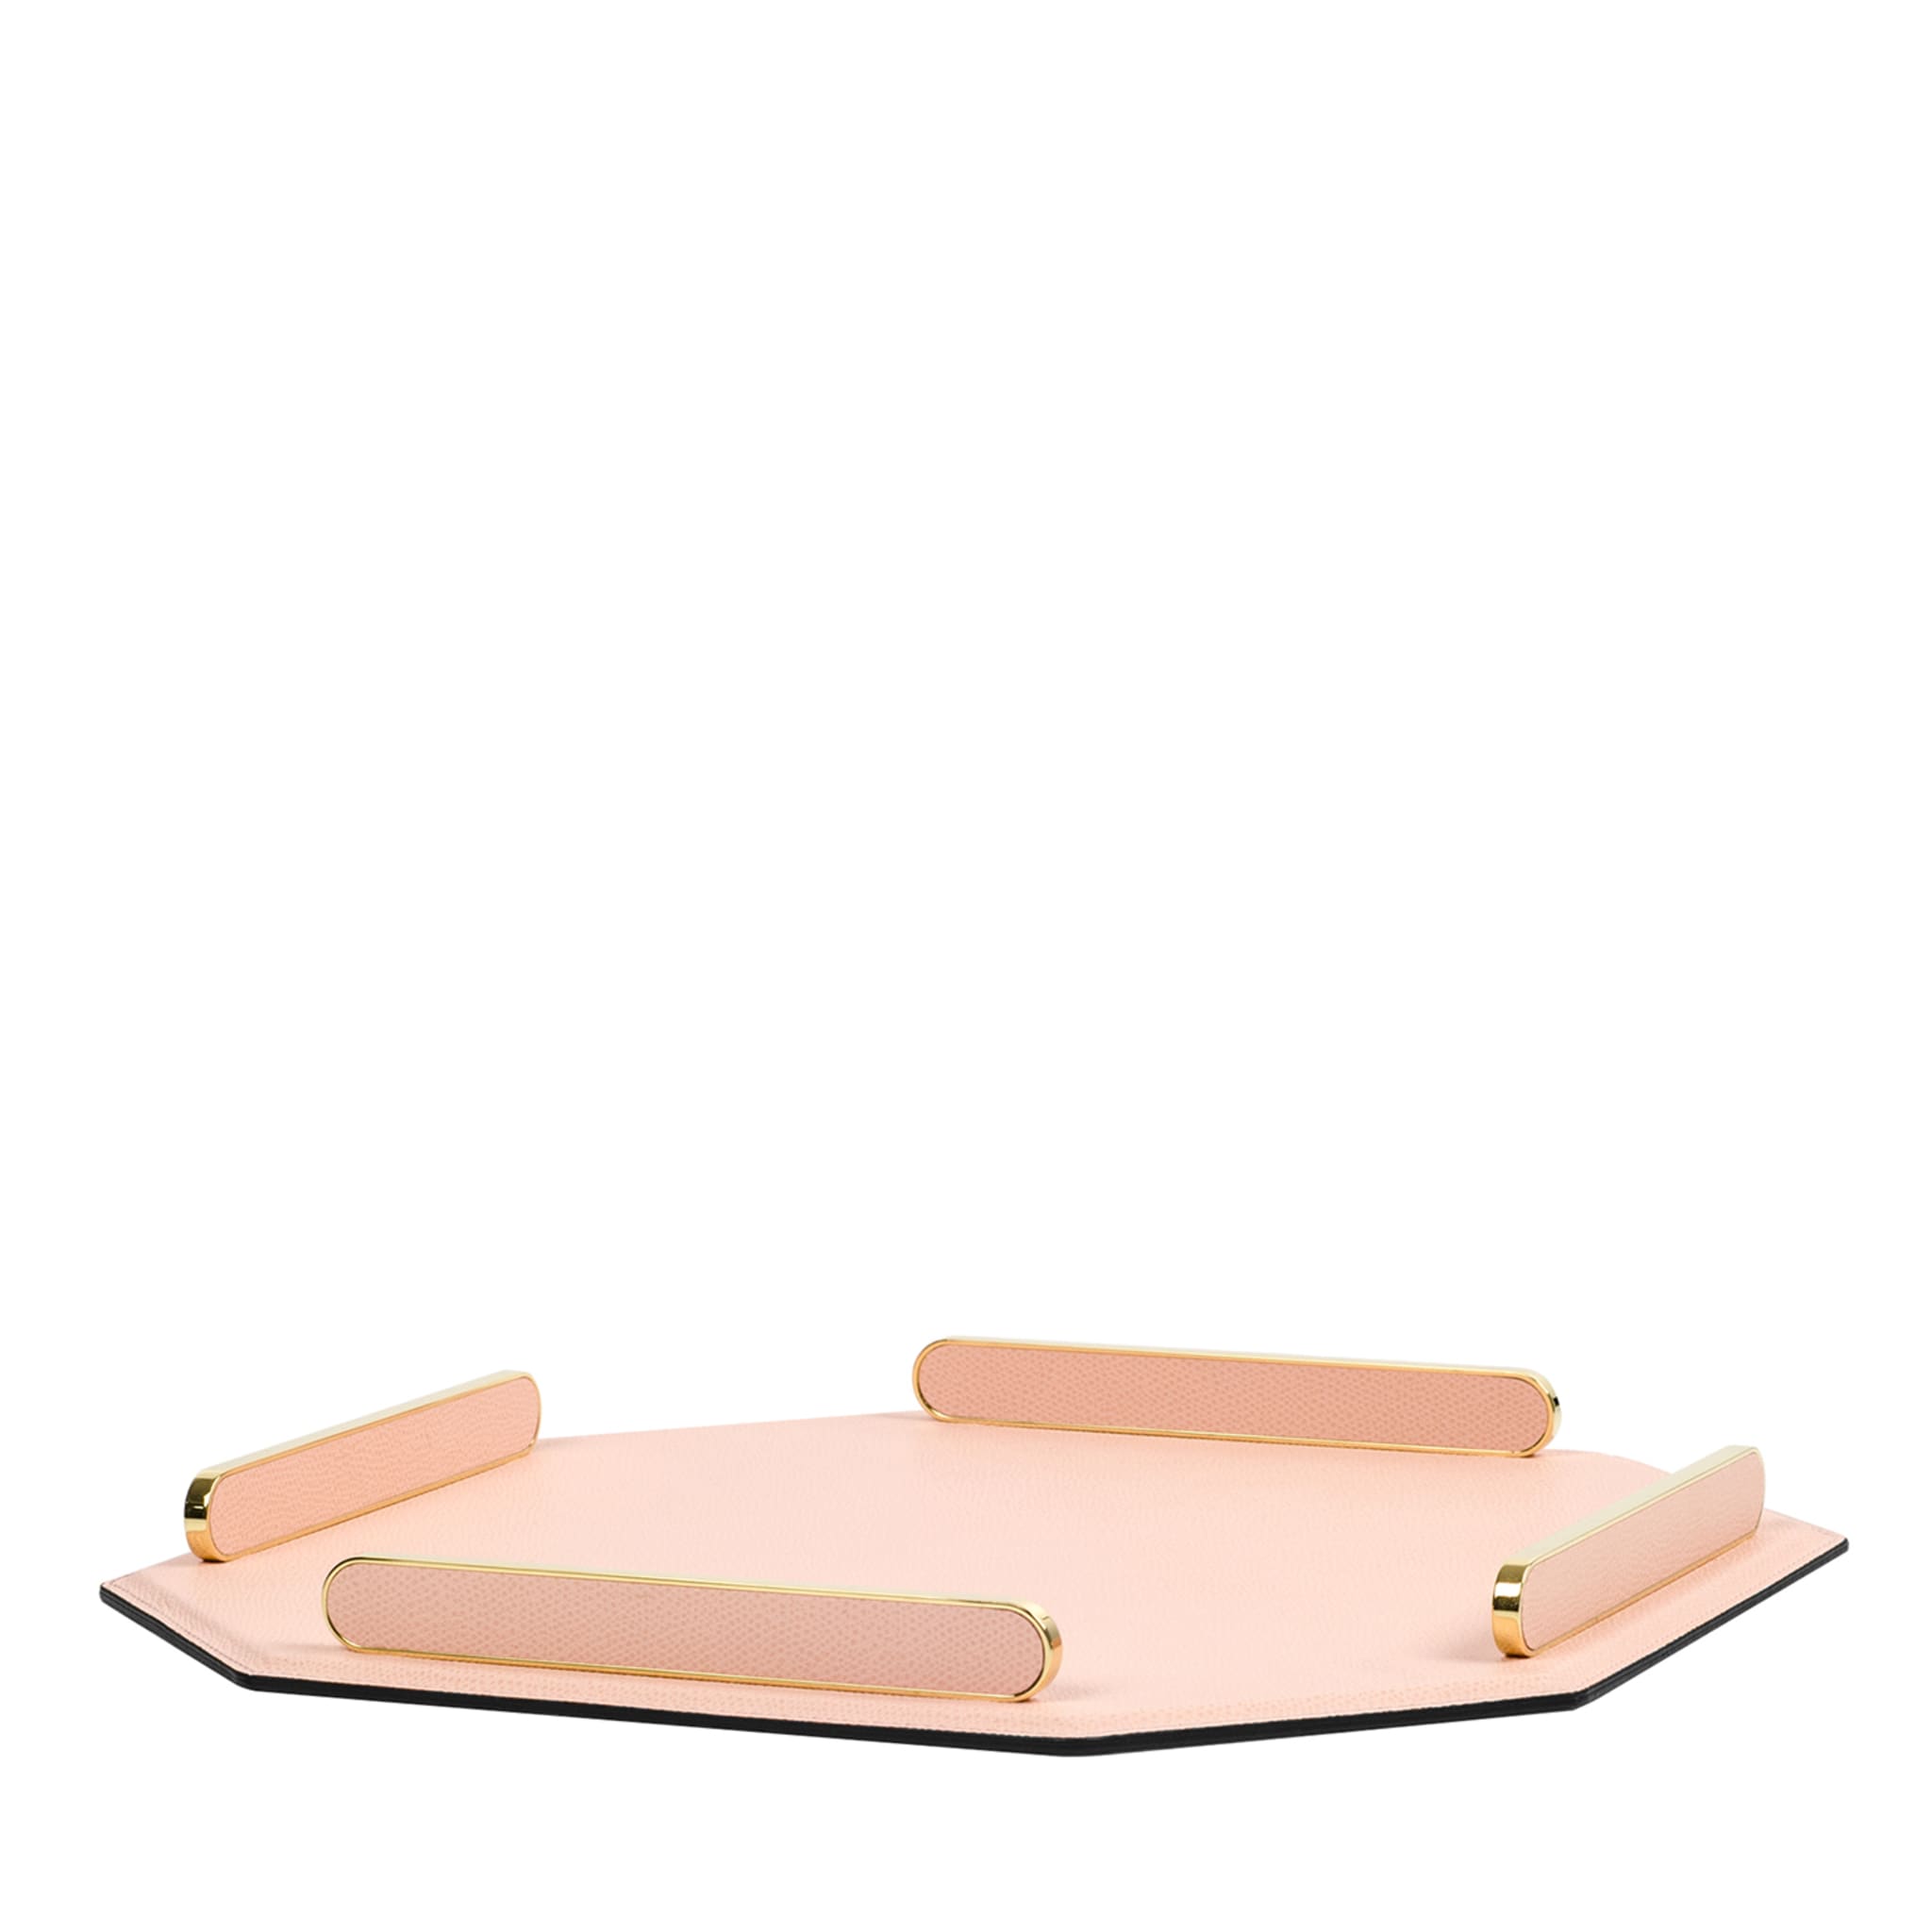 Octagonal Golden/Pink Leather Tray  - Main view